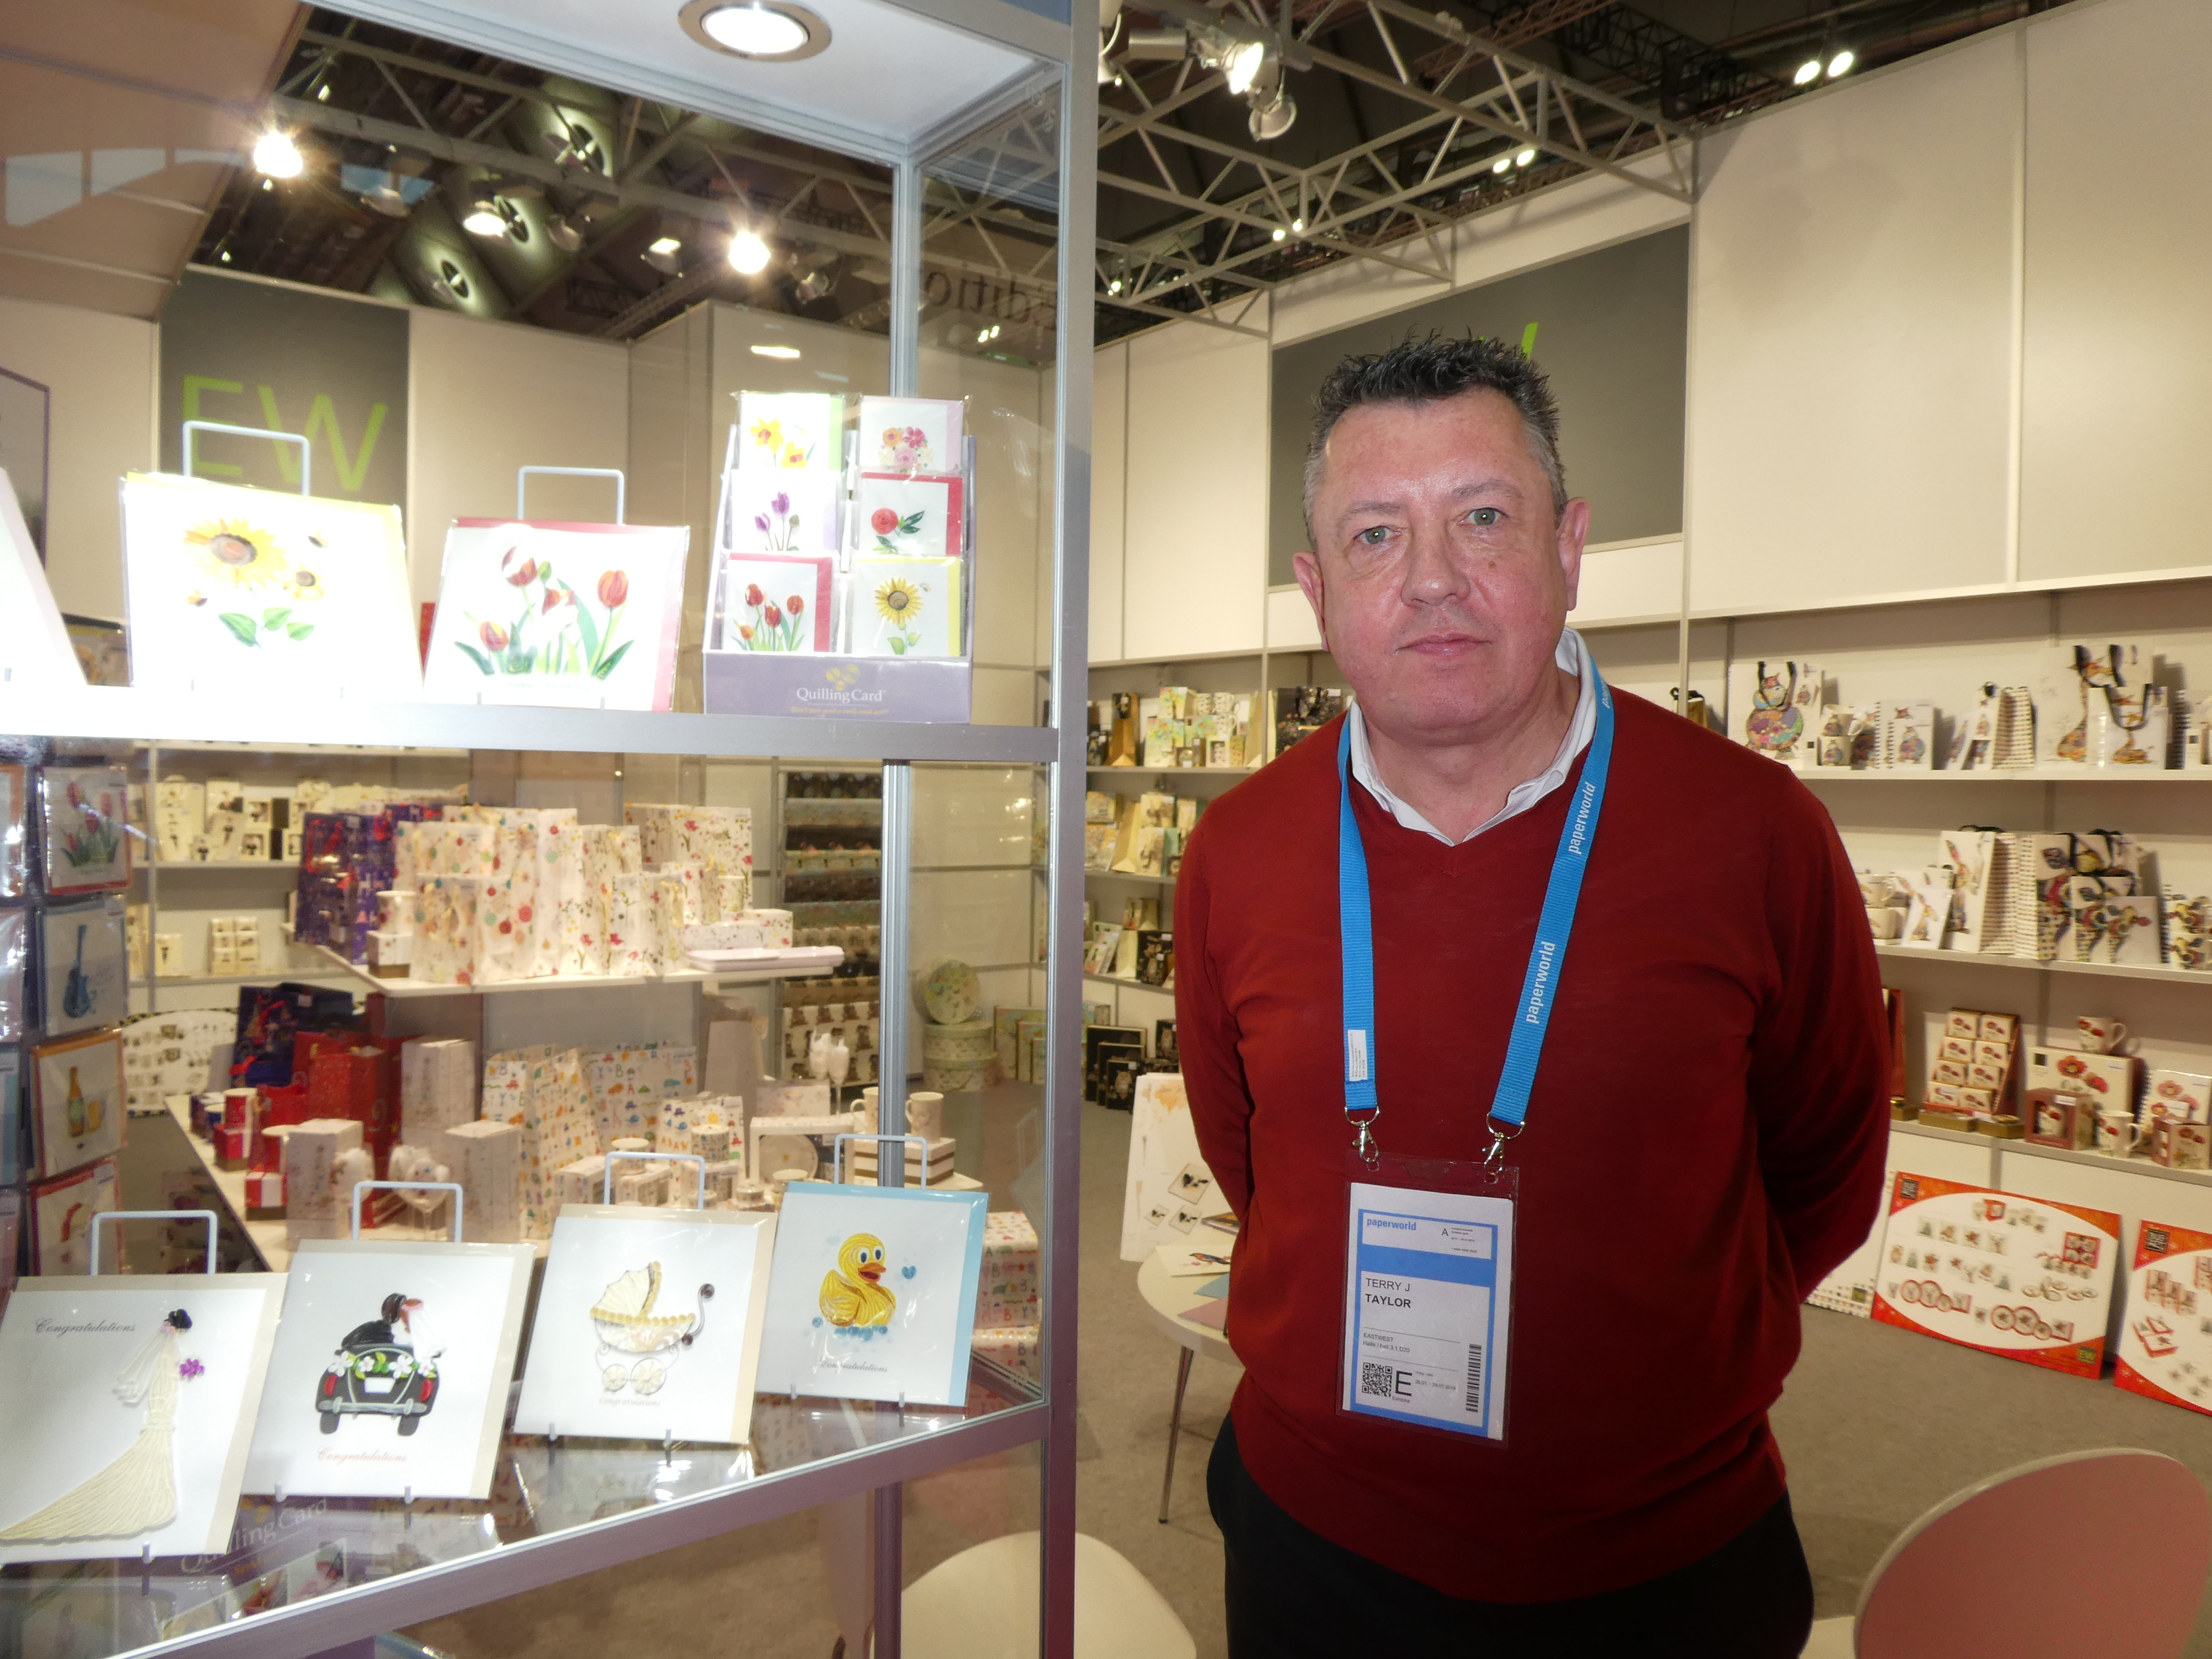 Above: As well as showing a vast range of Bug Art licensed giftpackaging and gift concepts, East West’s Terry Taylor revealed the company has become the European distributor of US company Quilling Card. 